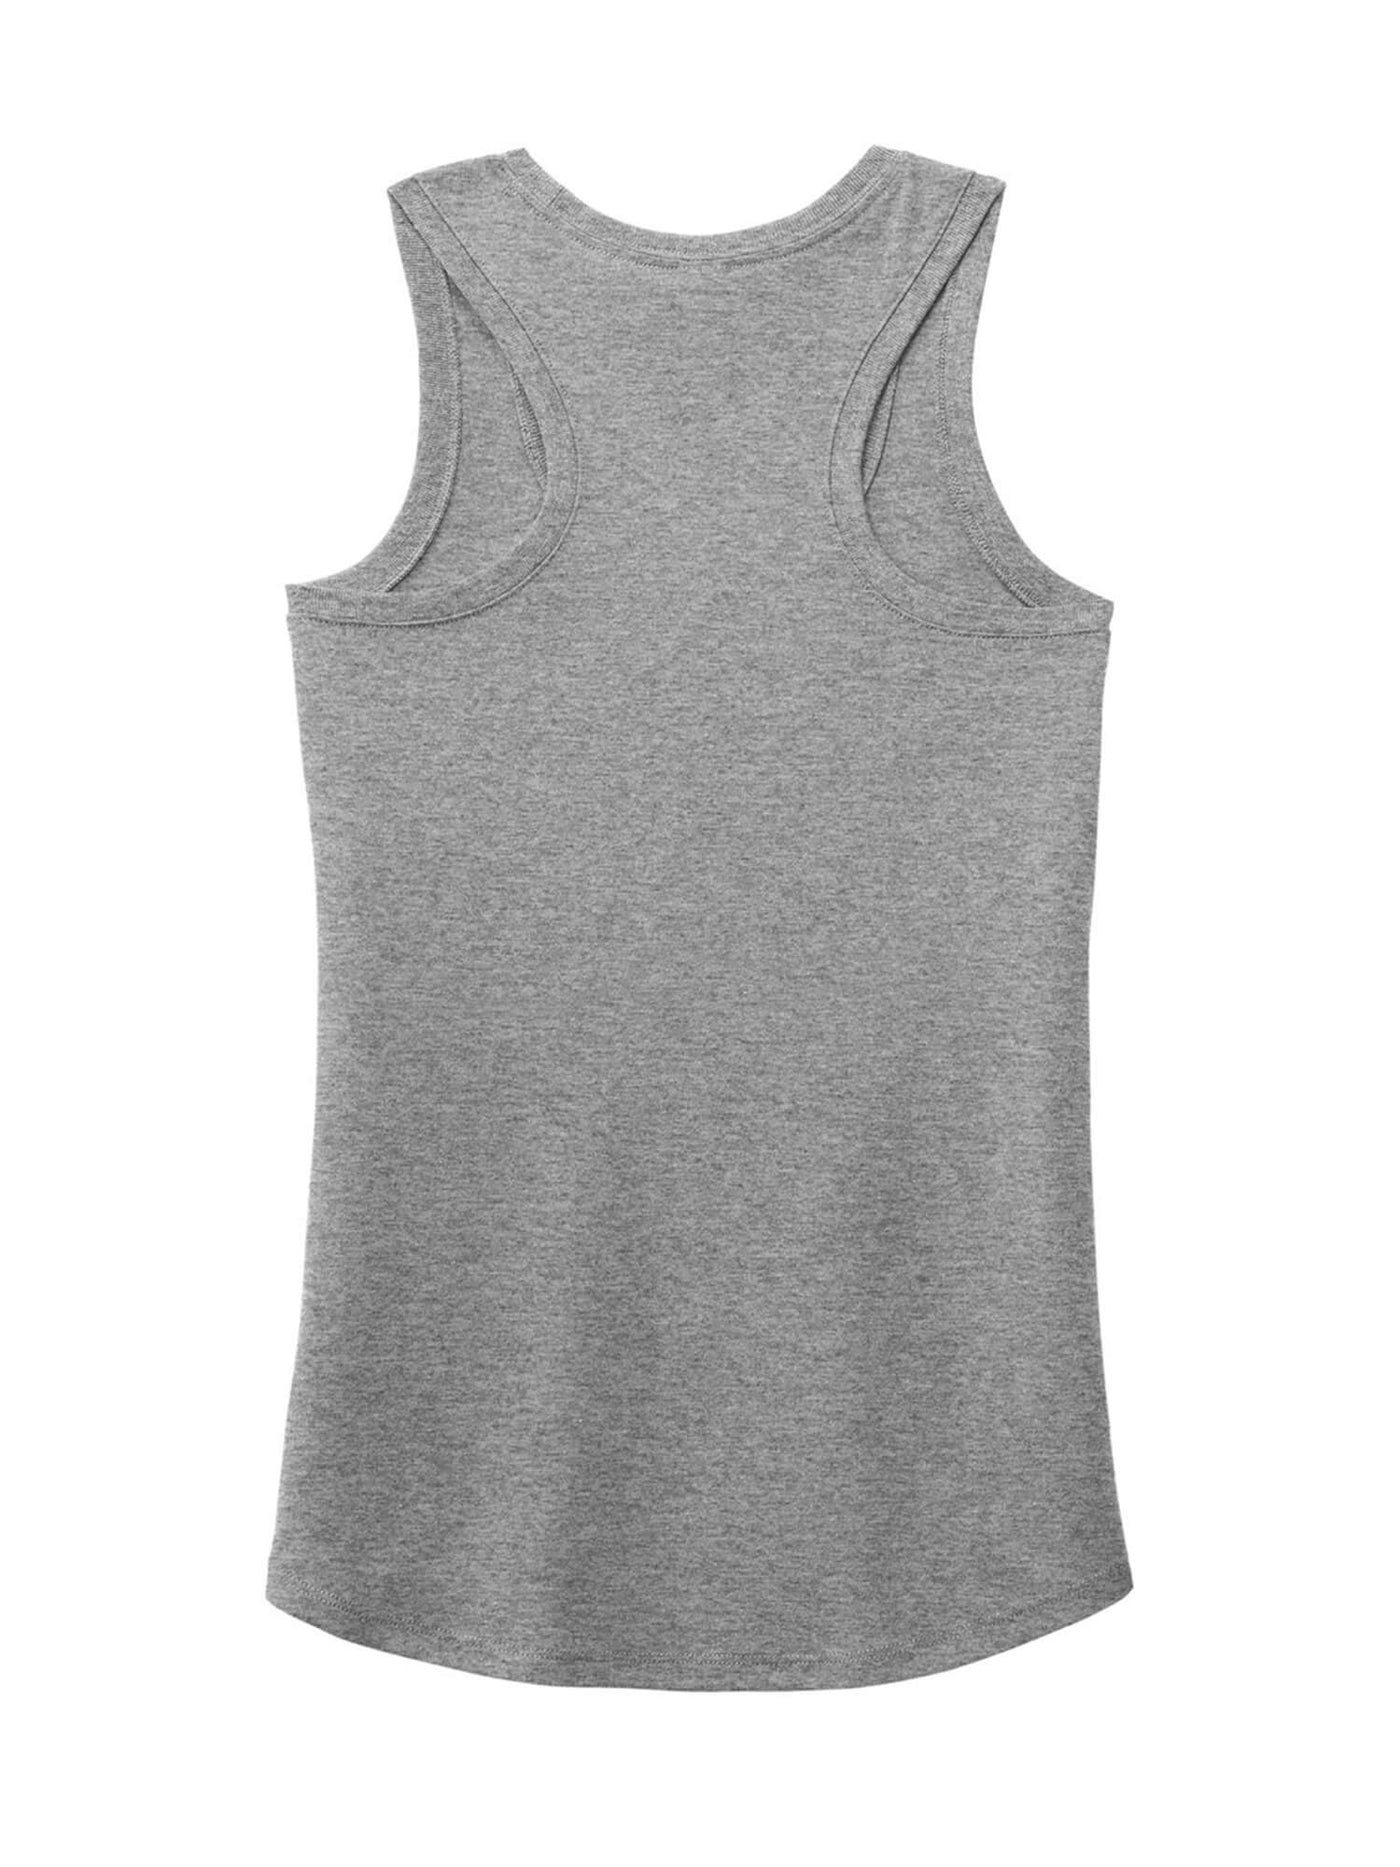 Women's Stitched Steer Tank